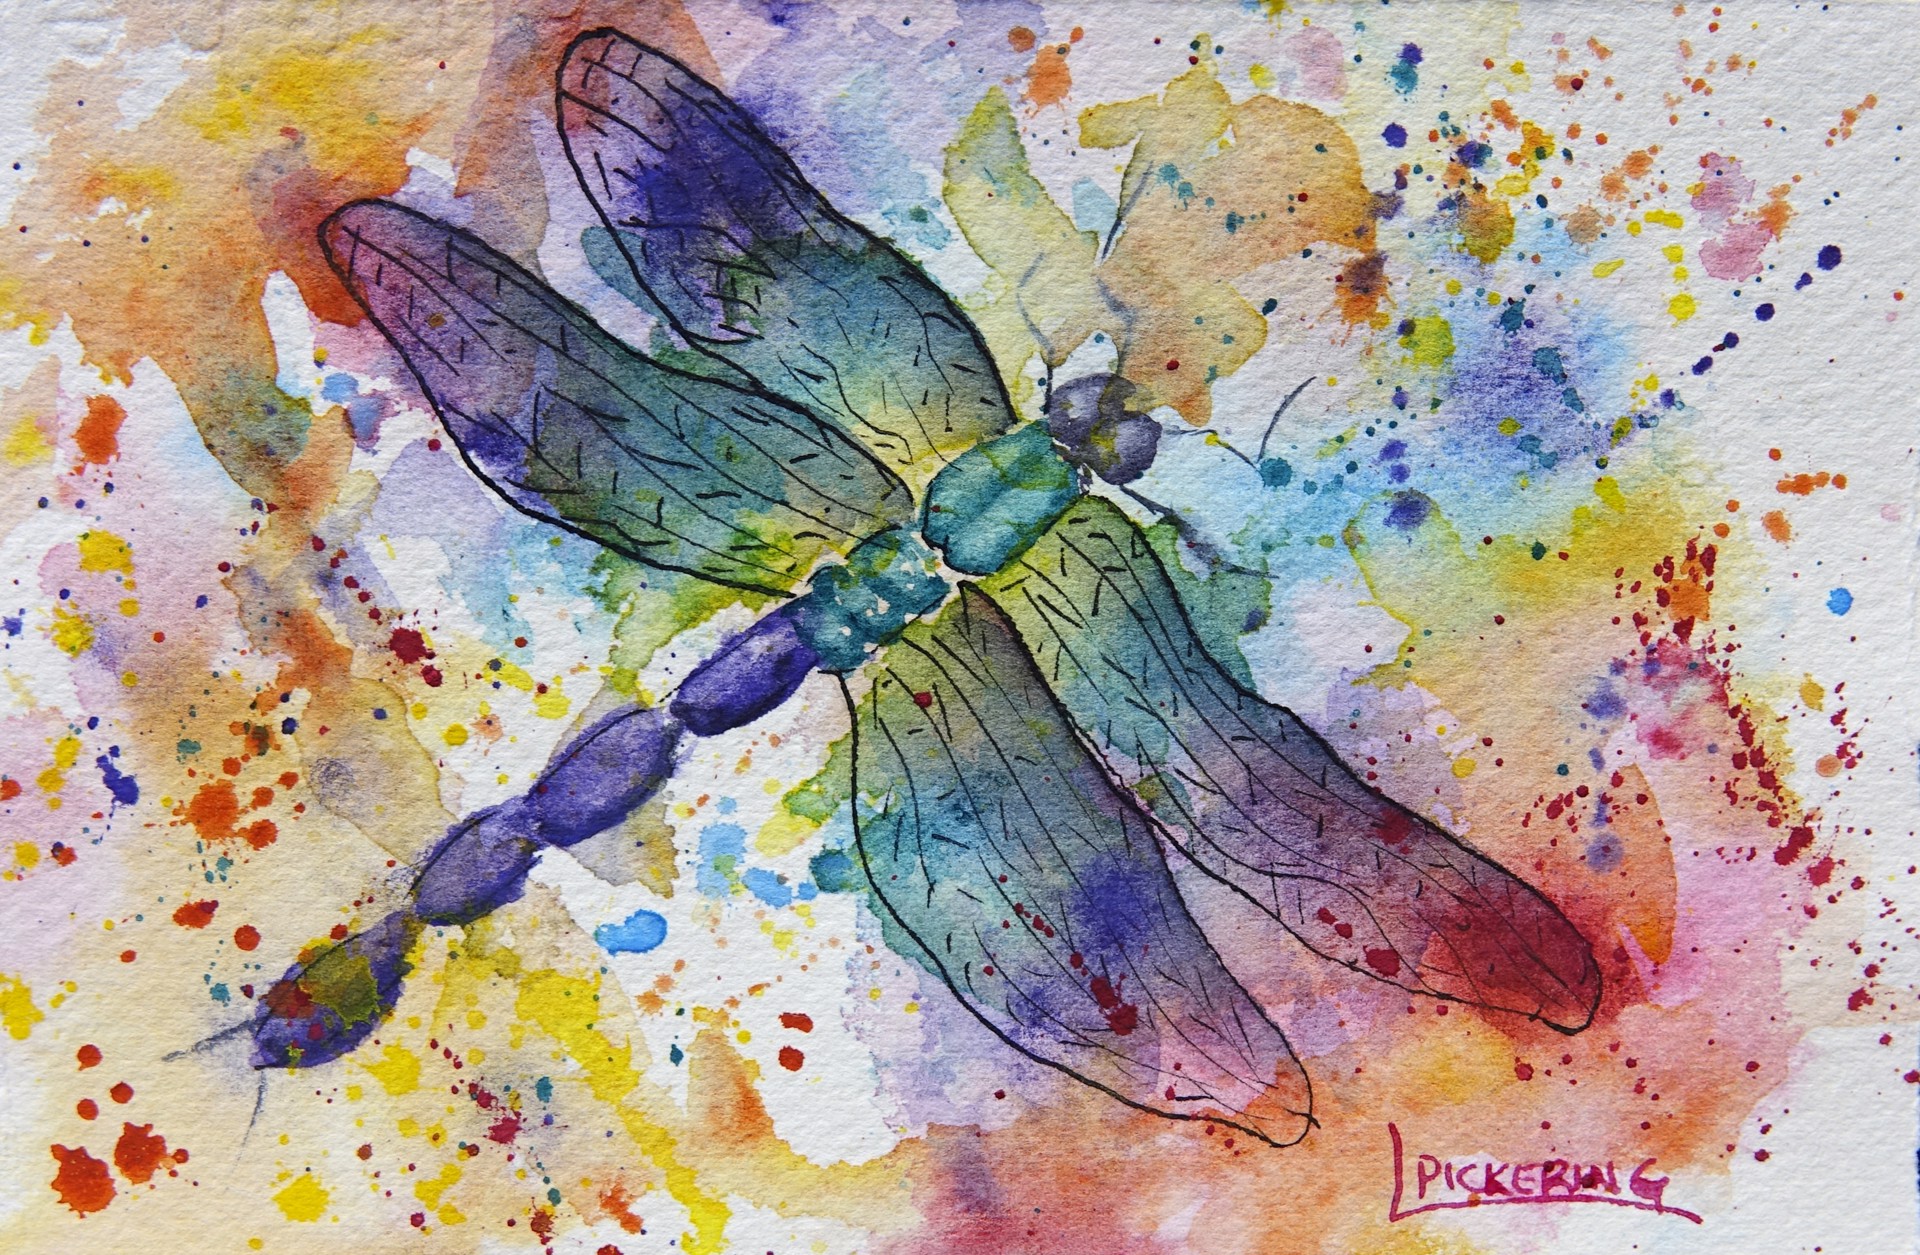 Dragonfly Pirouette by Laura Pickering